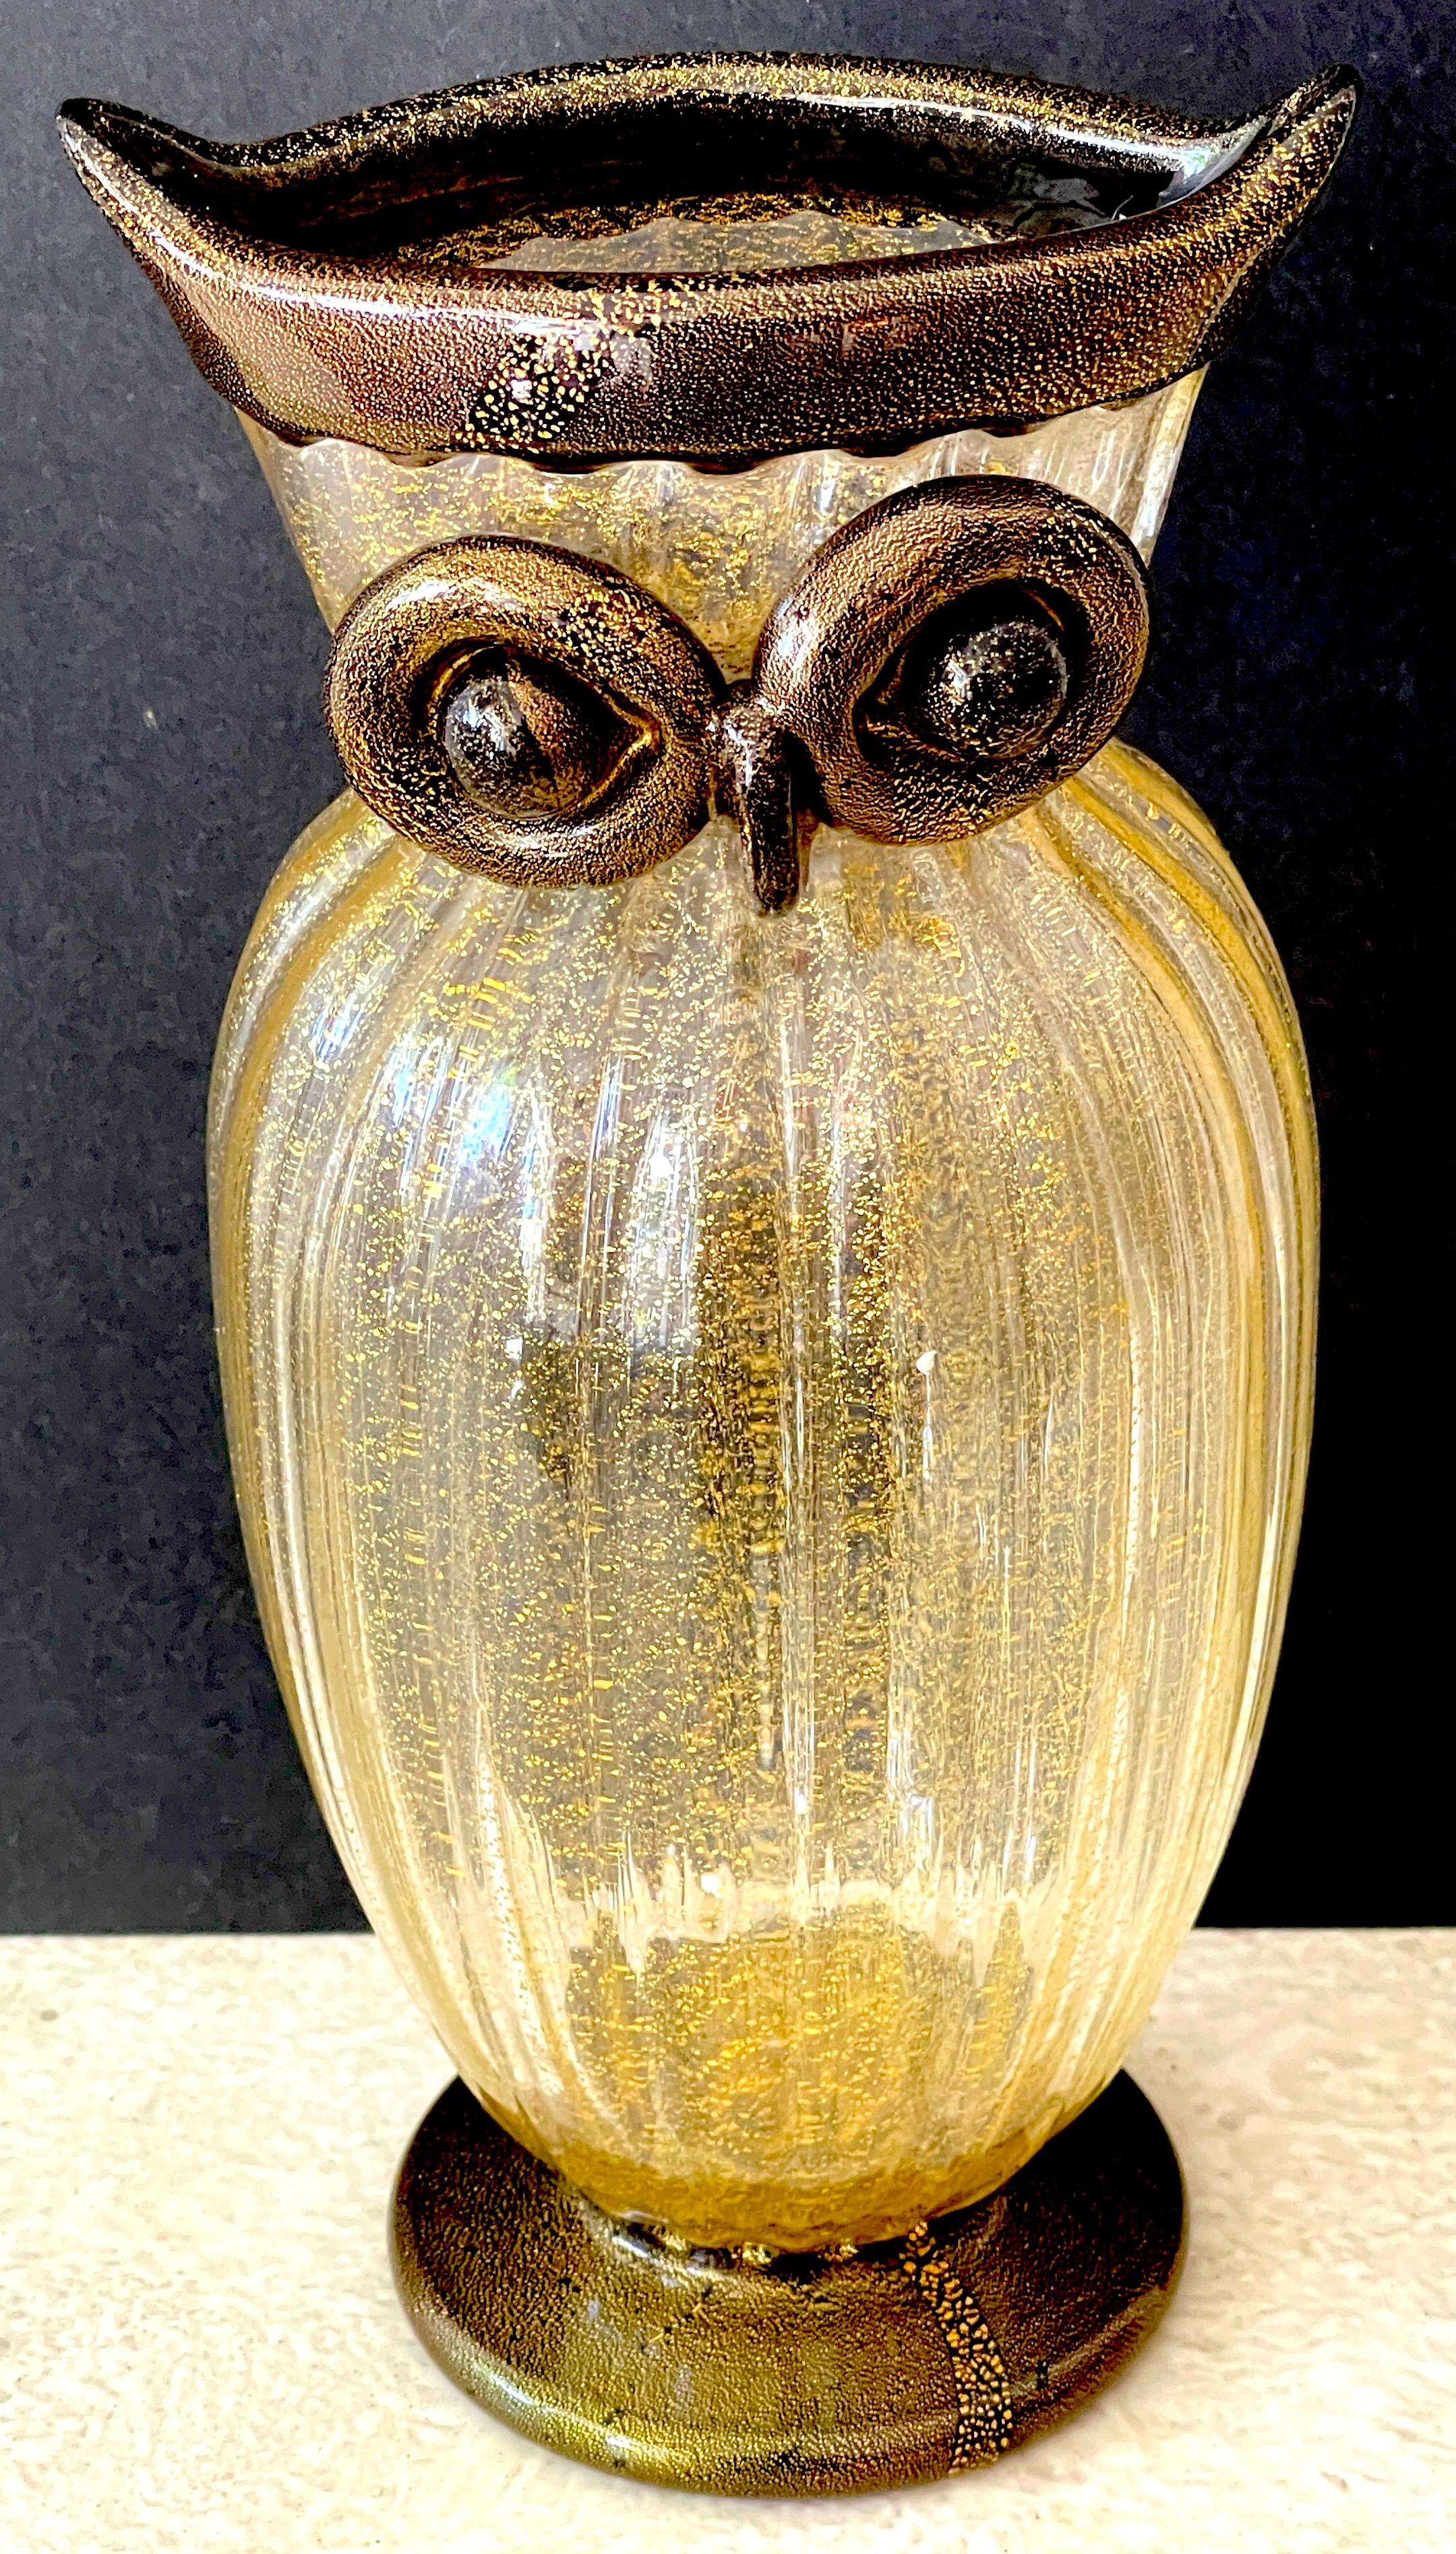 Murano figural owl vase signed Gambaro & Poggi, With gold infused body, realistically modeled with applied glass. Labeled and signed on base 'Gambaro & Poggi'.